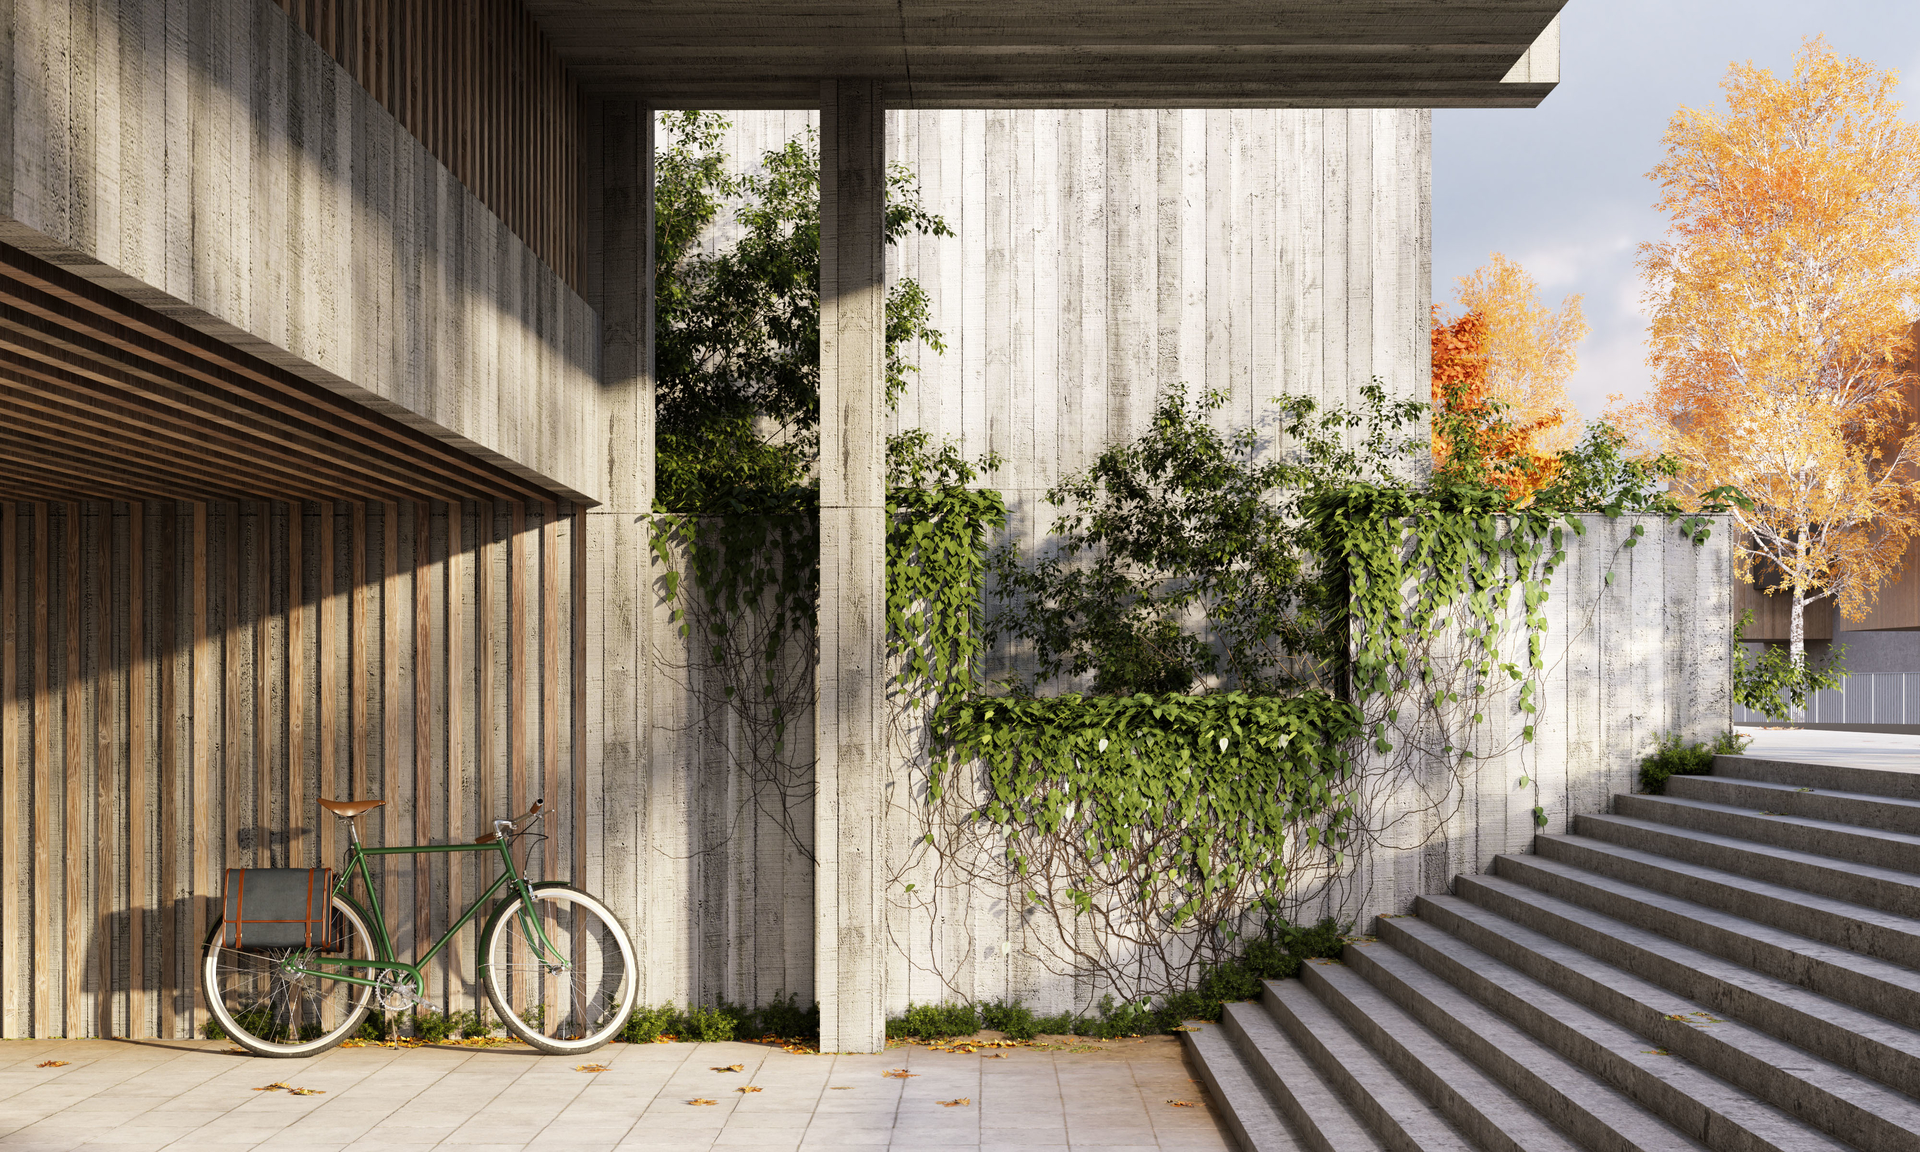 d PS dsmax vray itoosoftware forestpro stairwell tenbarsofsoap